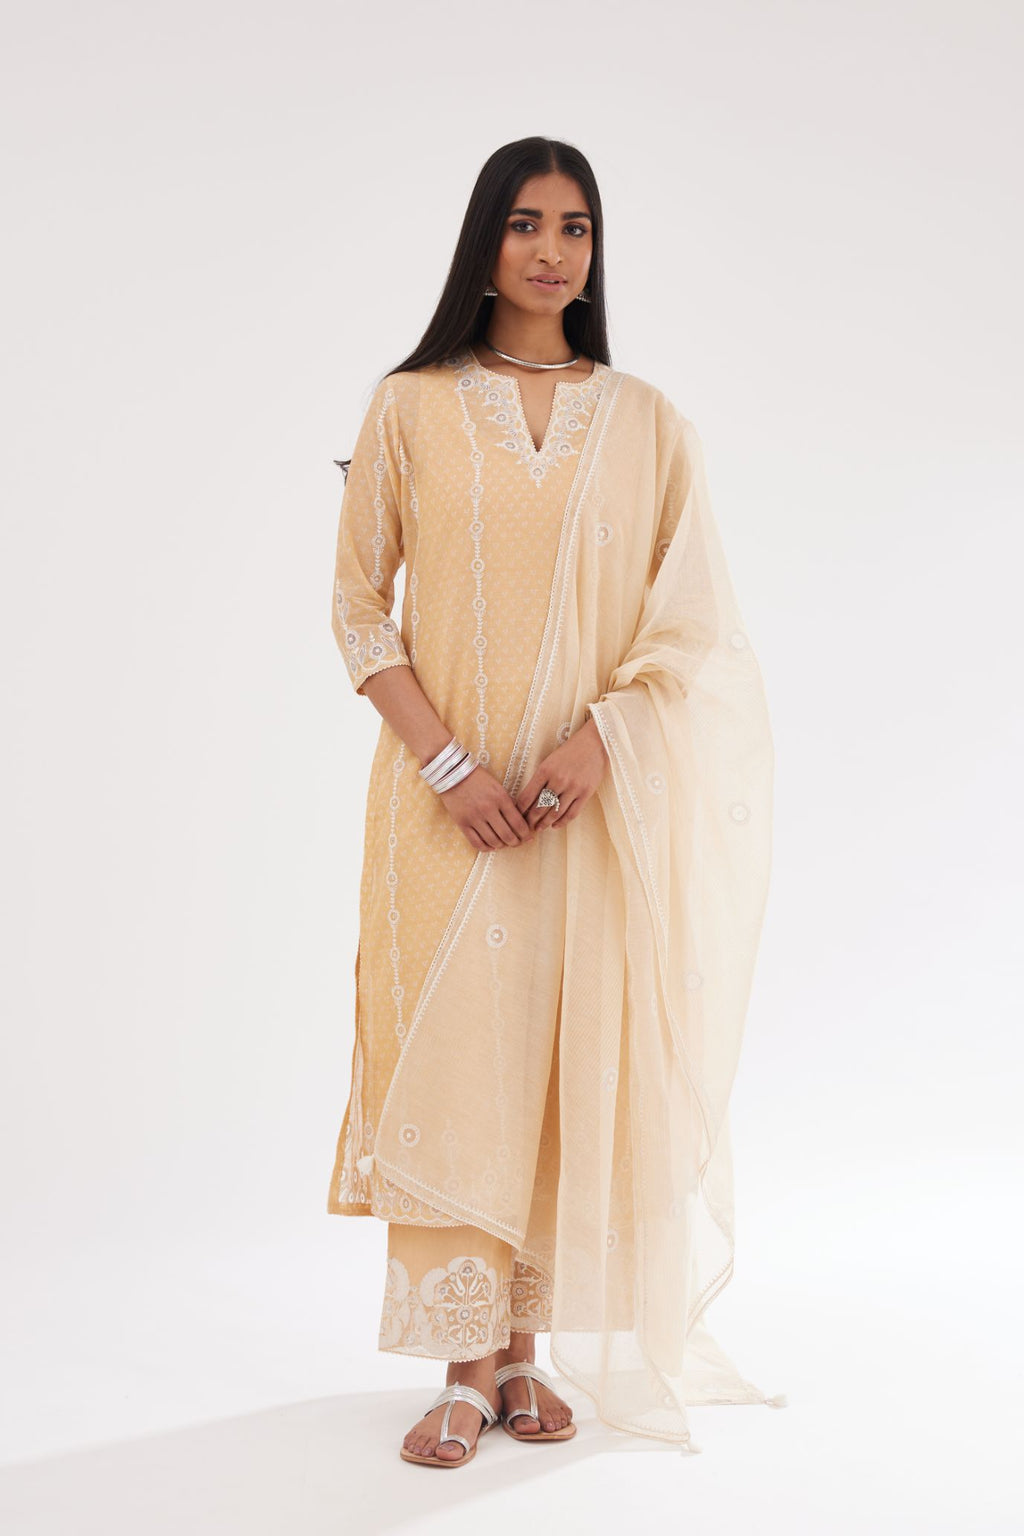 Peach cotton chanderi Dupatta with all-over hand block print and small embroidered butis.